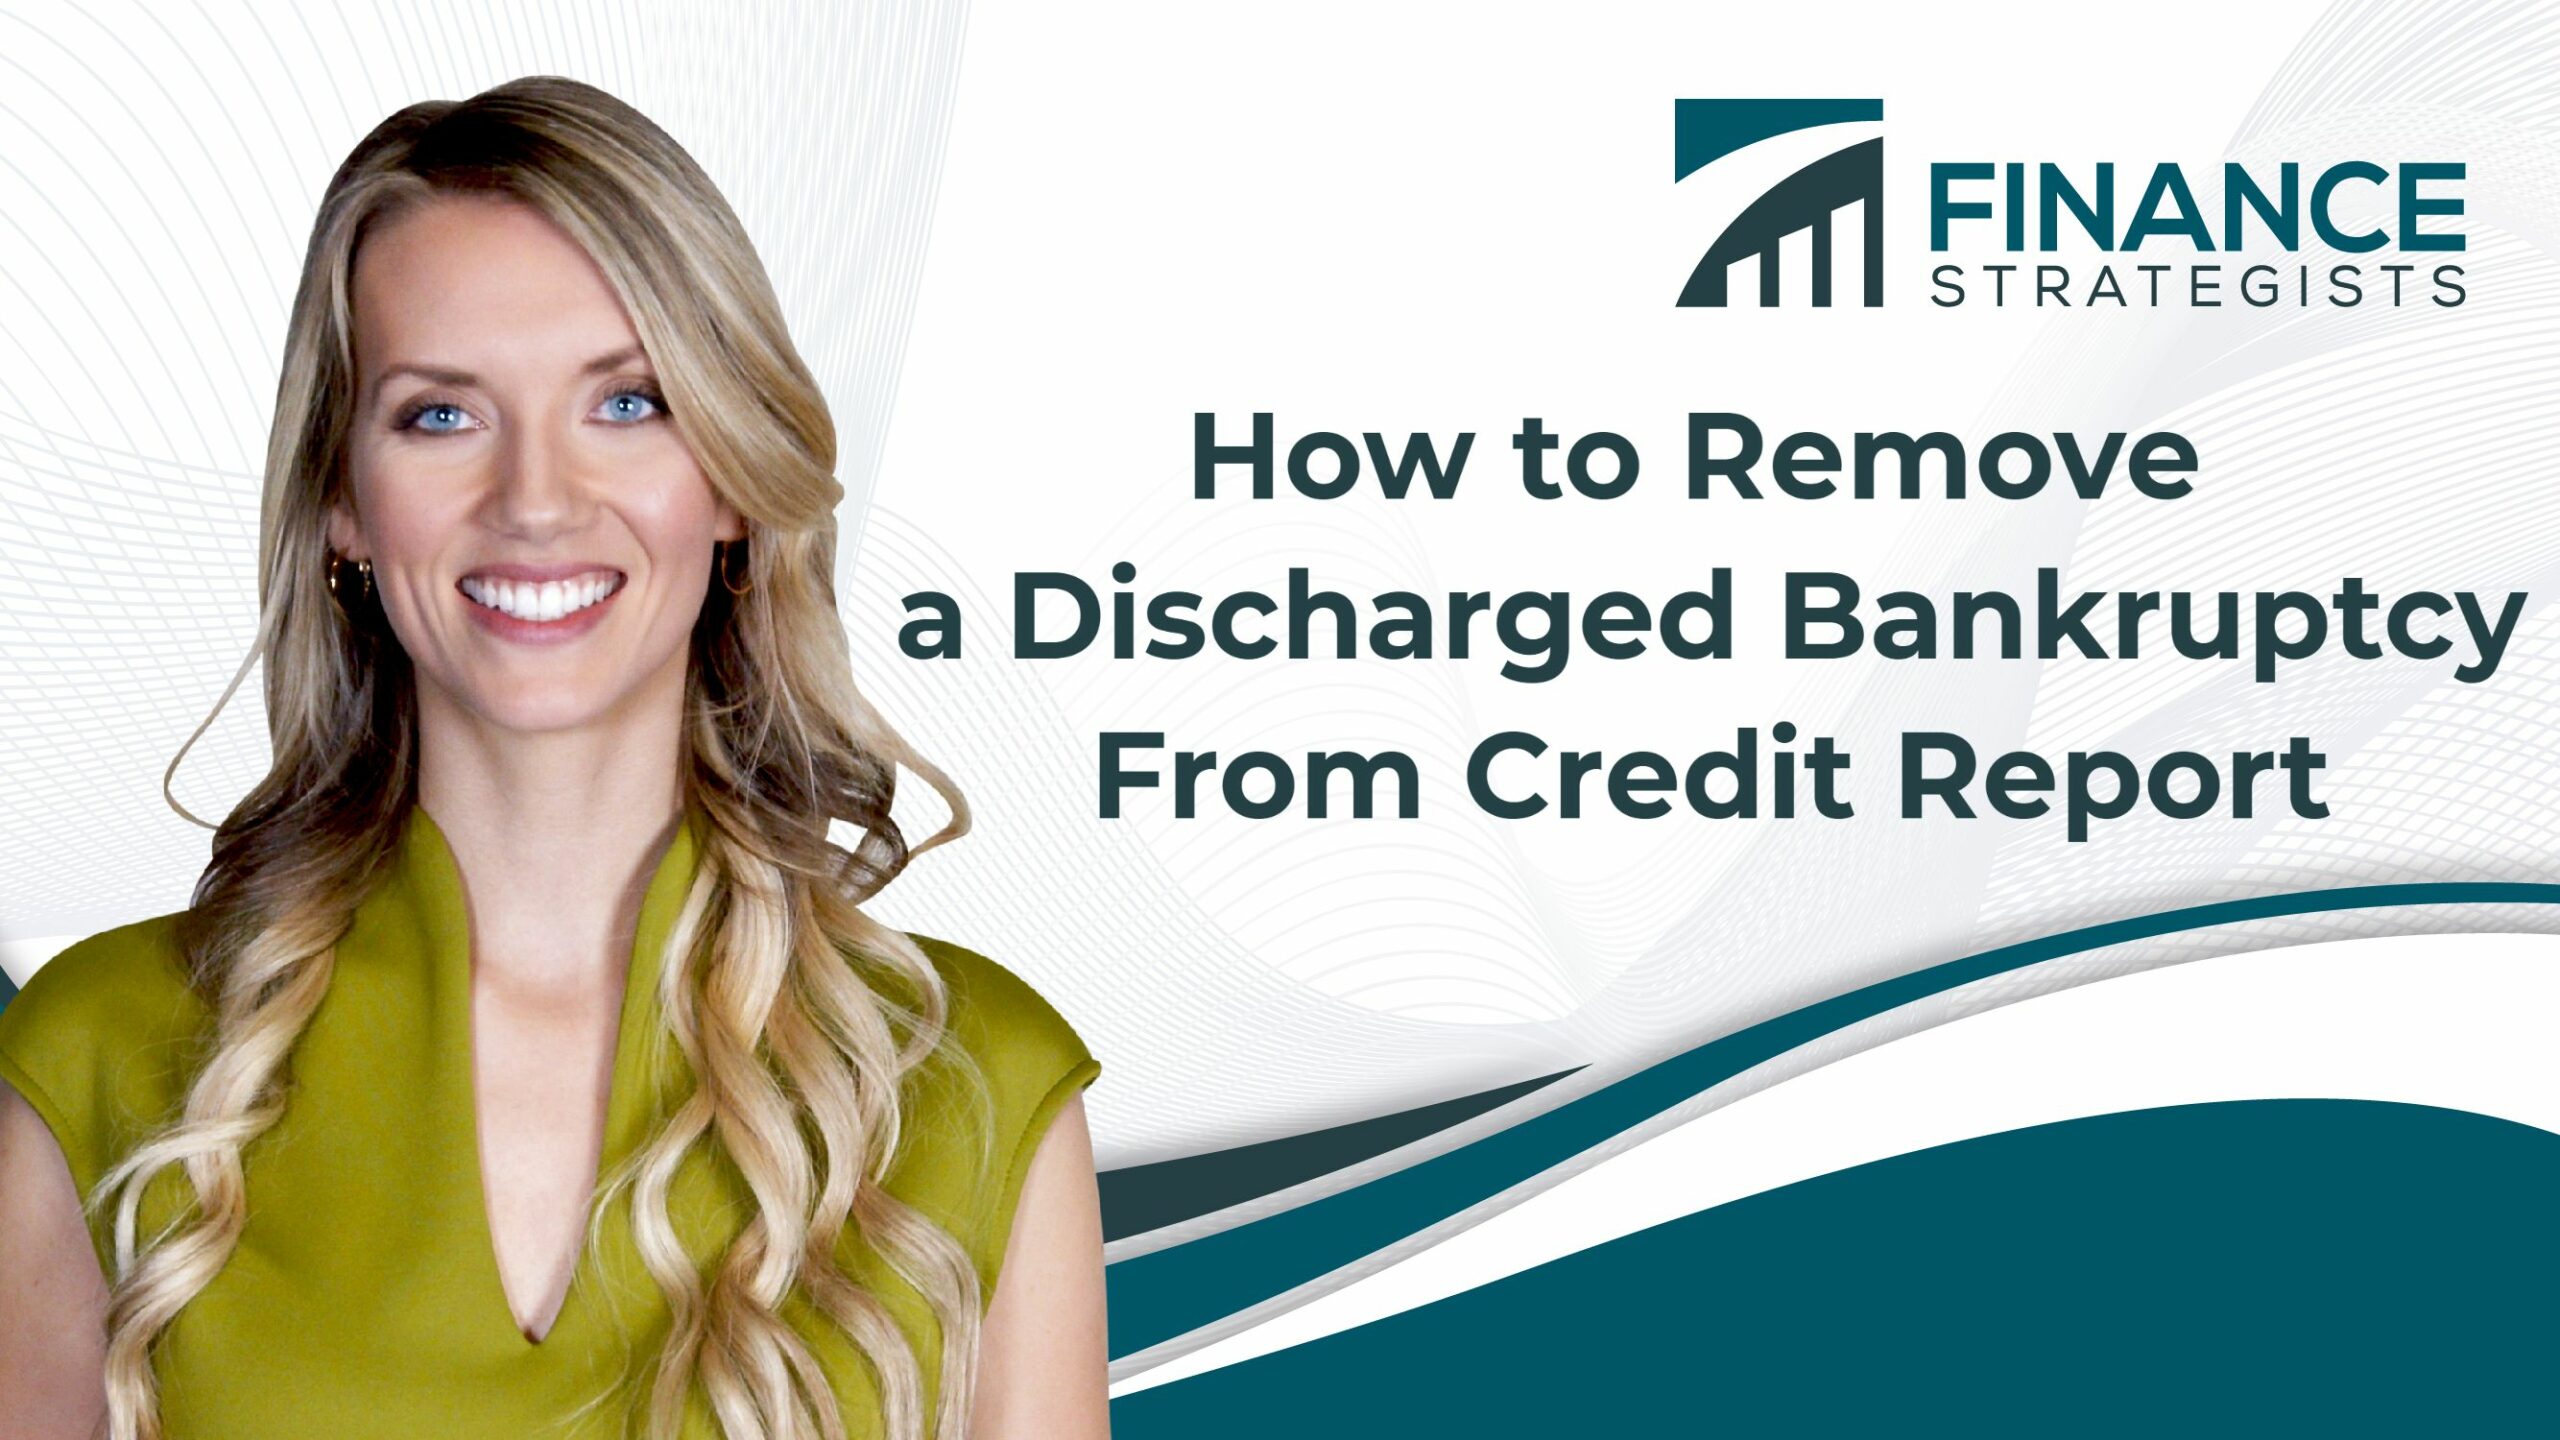 How to Remove a Discharged Bankruptcy From a Credit Report